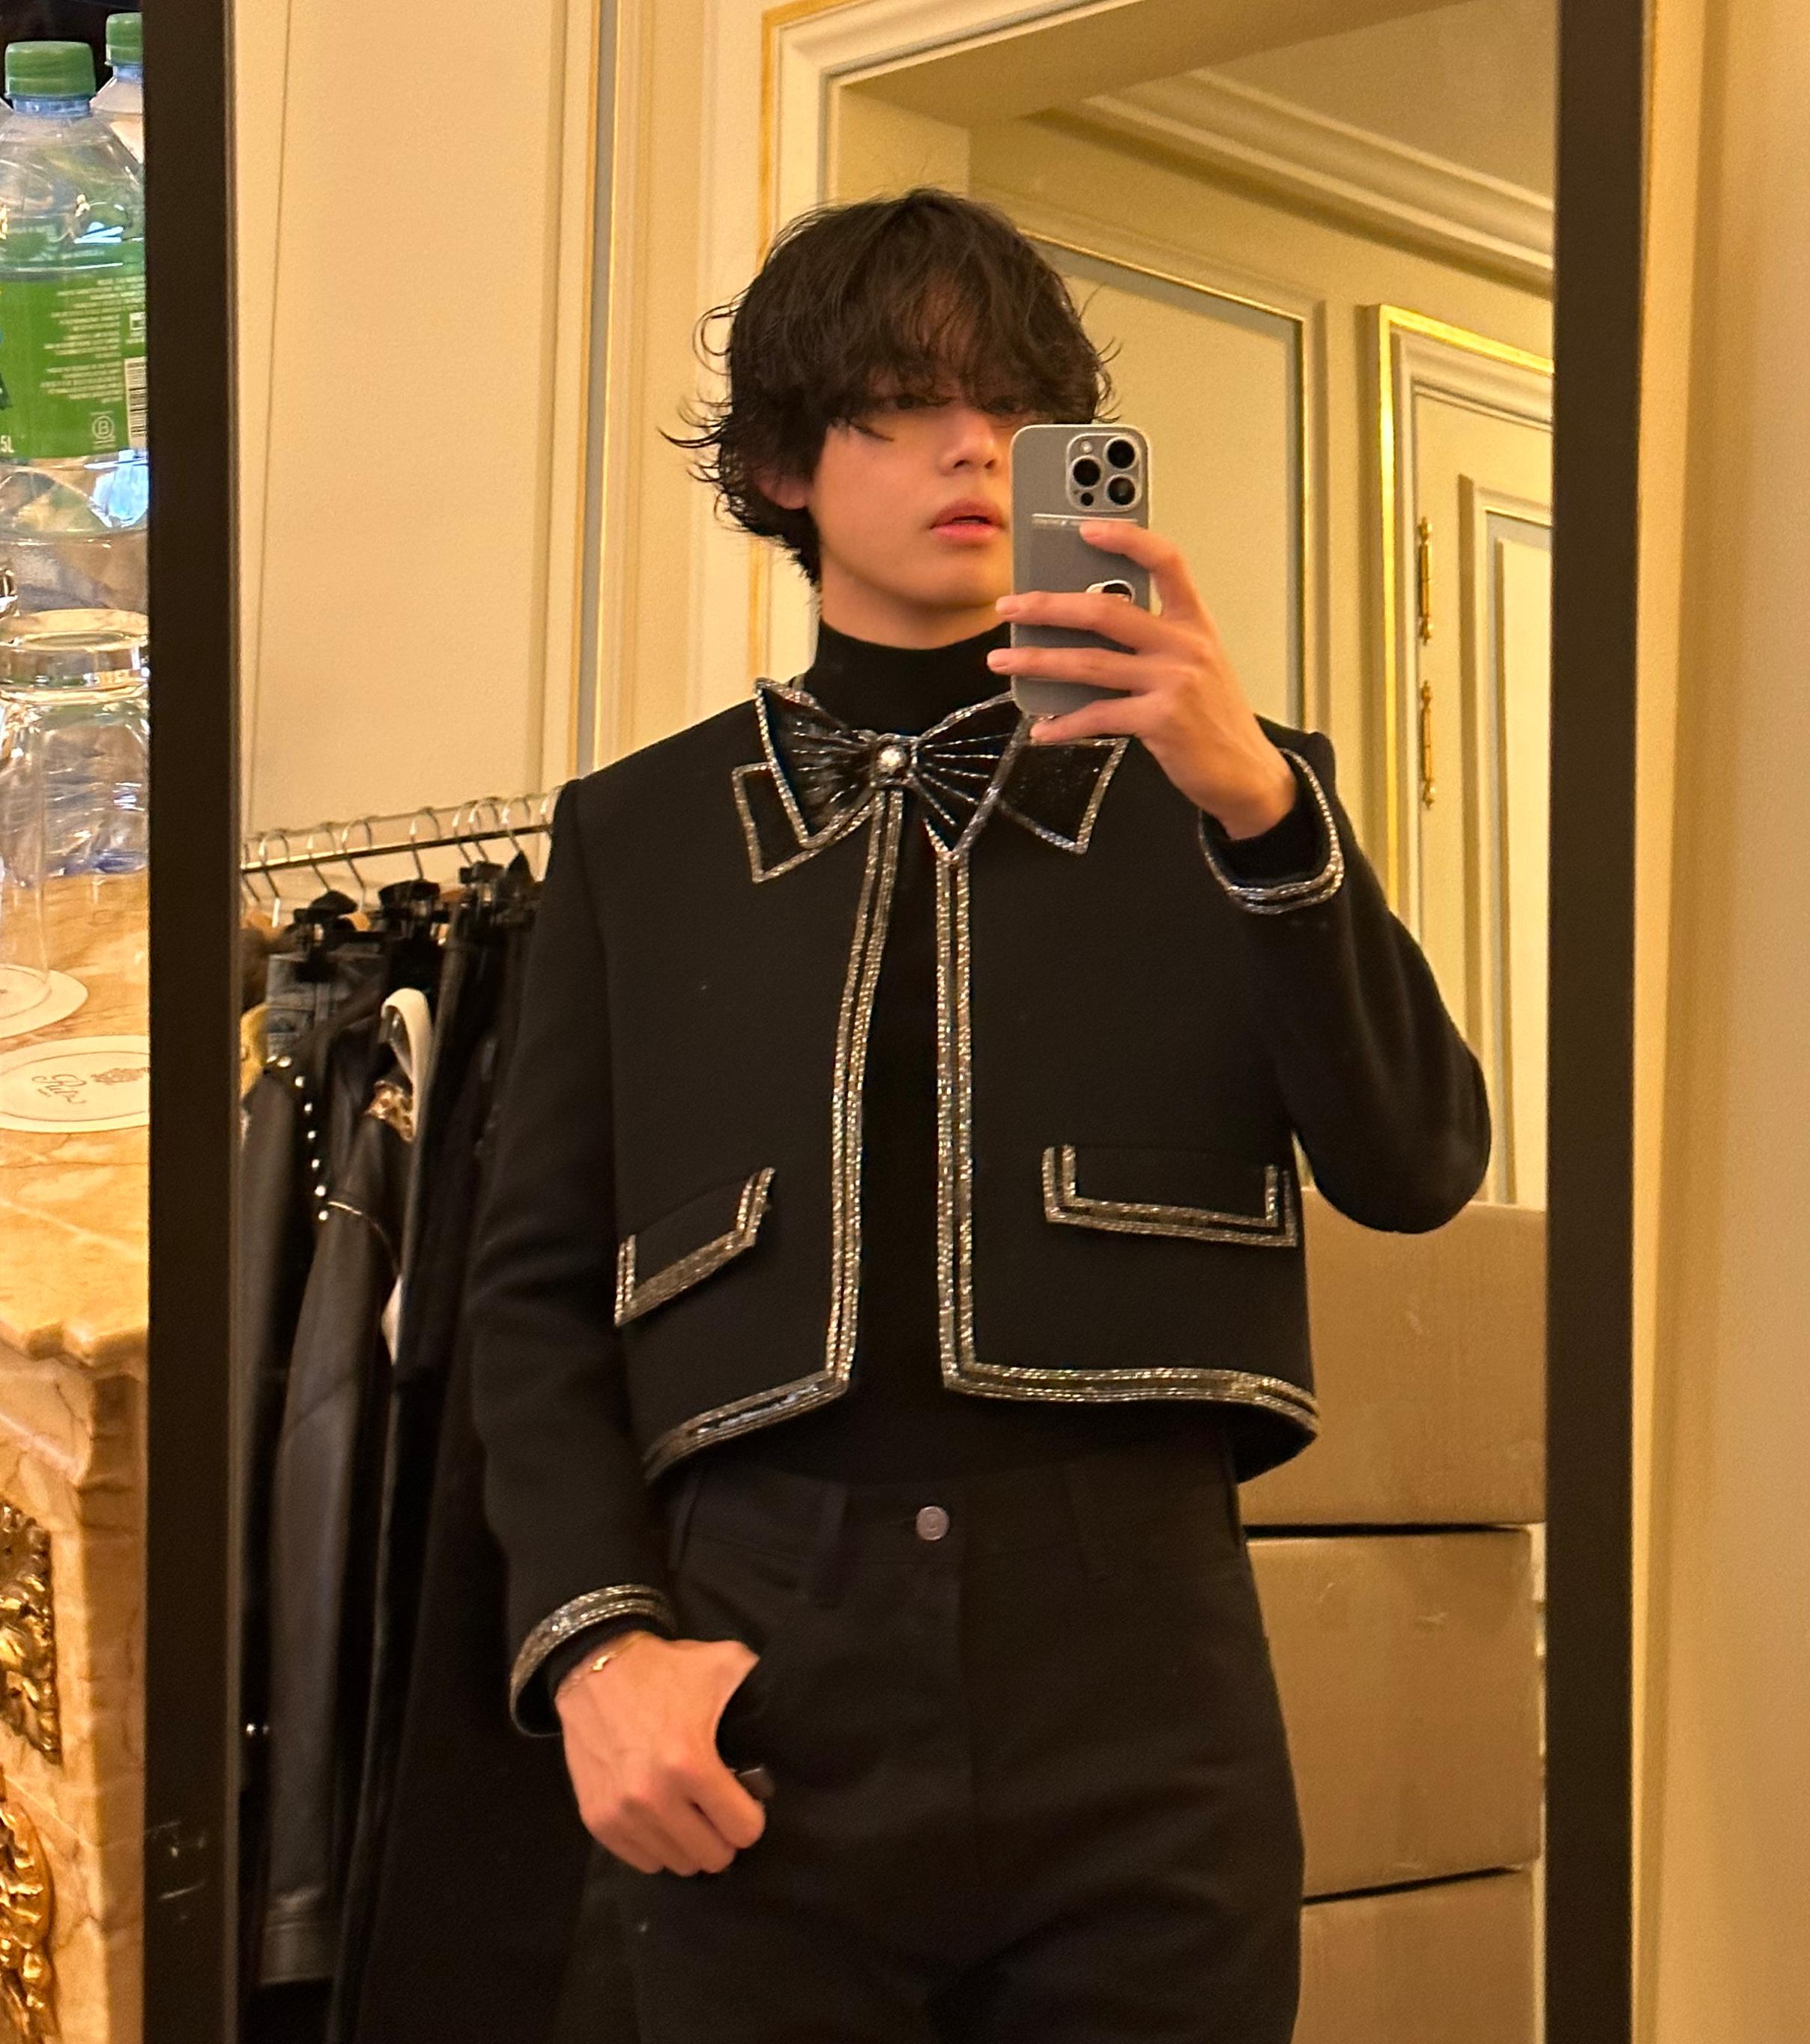 And he also poses for a mirror selfie at a fashion event, looking better than most models